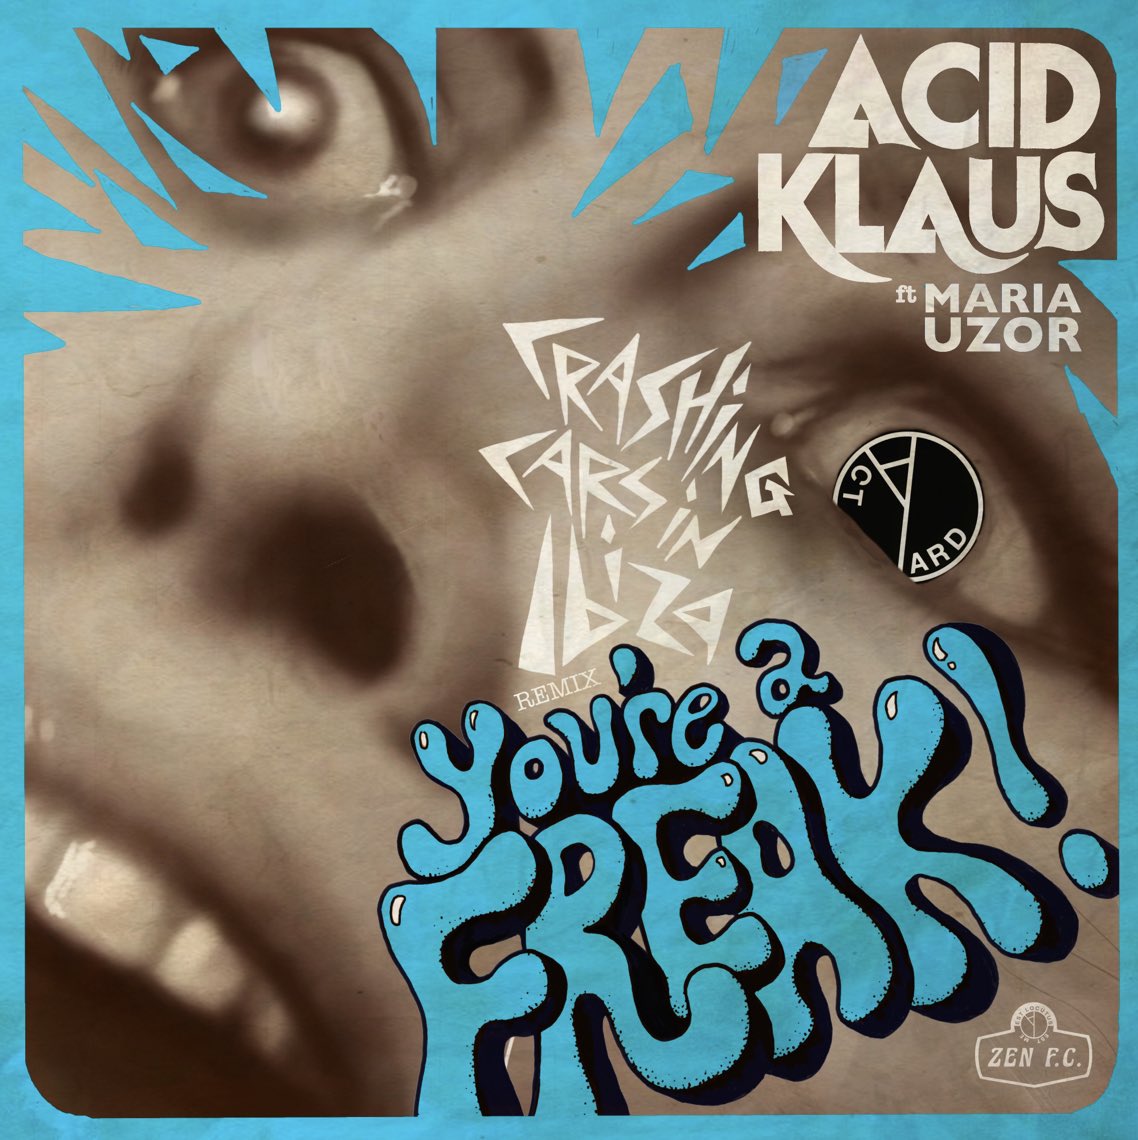 Out Now the entire ‘You’re a freak’ EP ft a new remix of Crashing cars in Ibiza ft @_MariaUzor by @YardActBand plus remixes by @babaalimusic @whlungmusic @tomsharkett @PyeCornerAudio and the lead single Ft @PhillyPiper 25 minutes of bangerisms x listen spotify.link/oLqA6nSSgDb